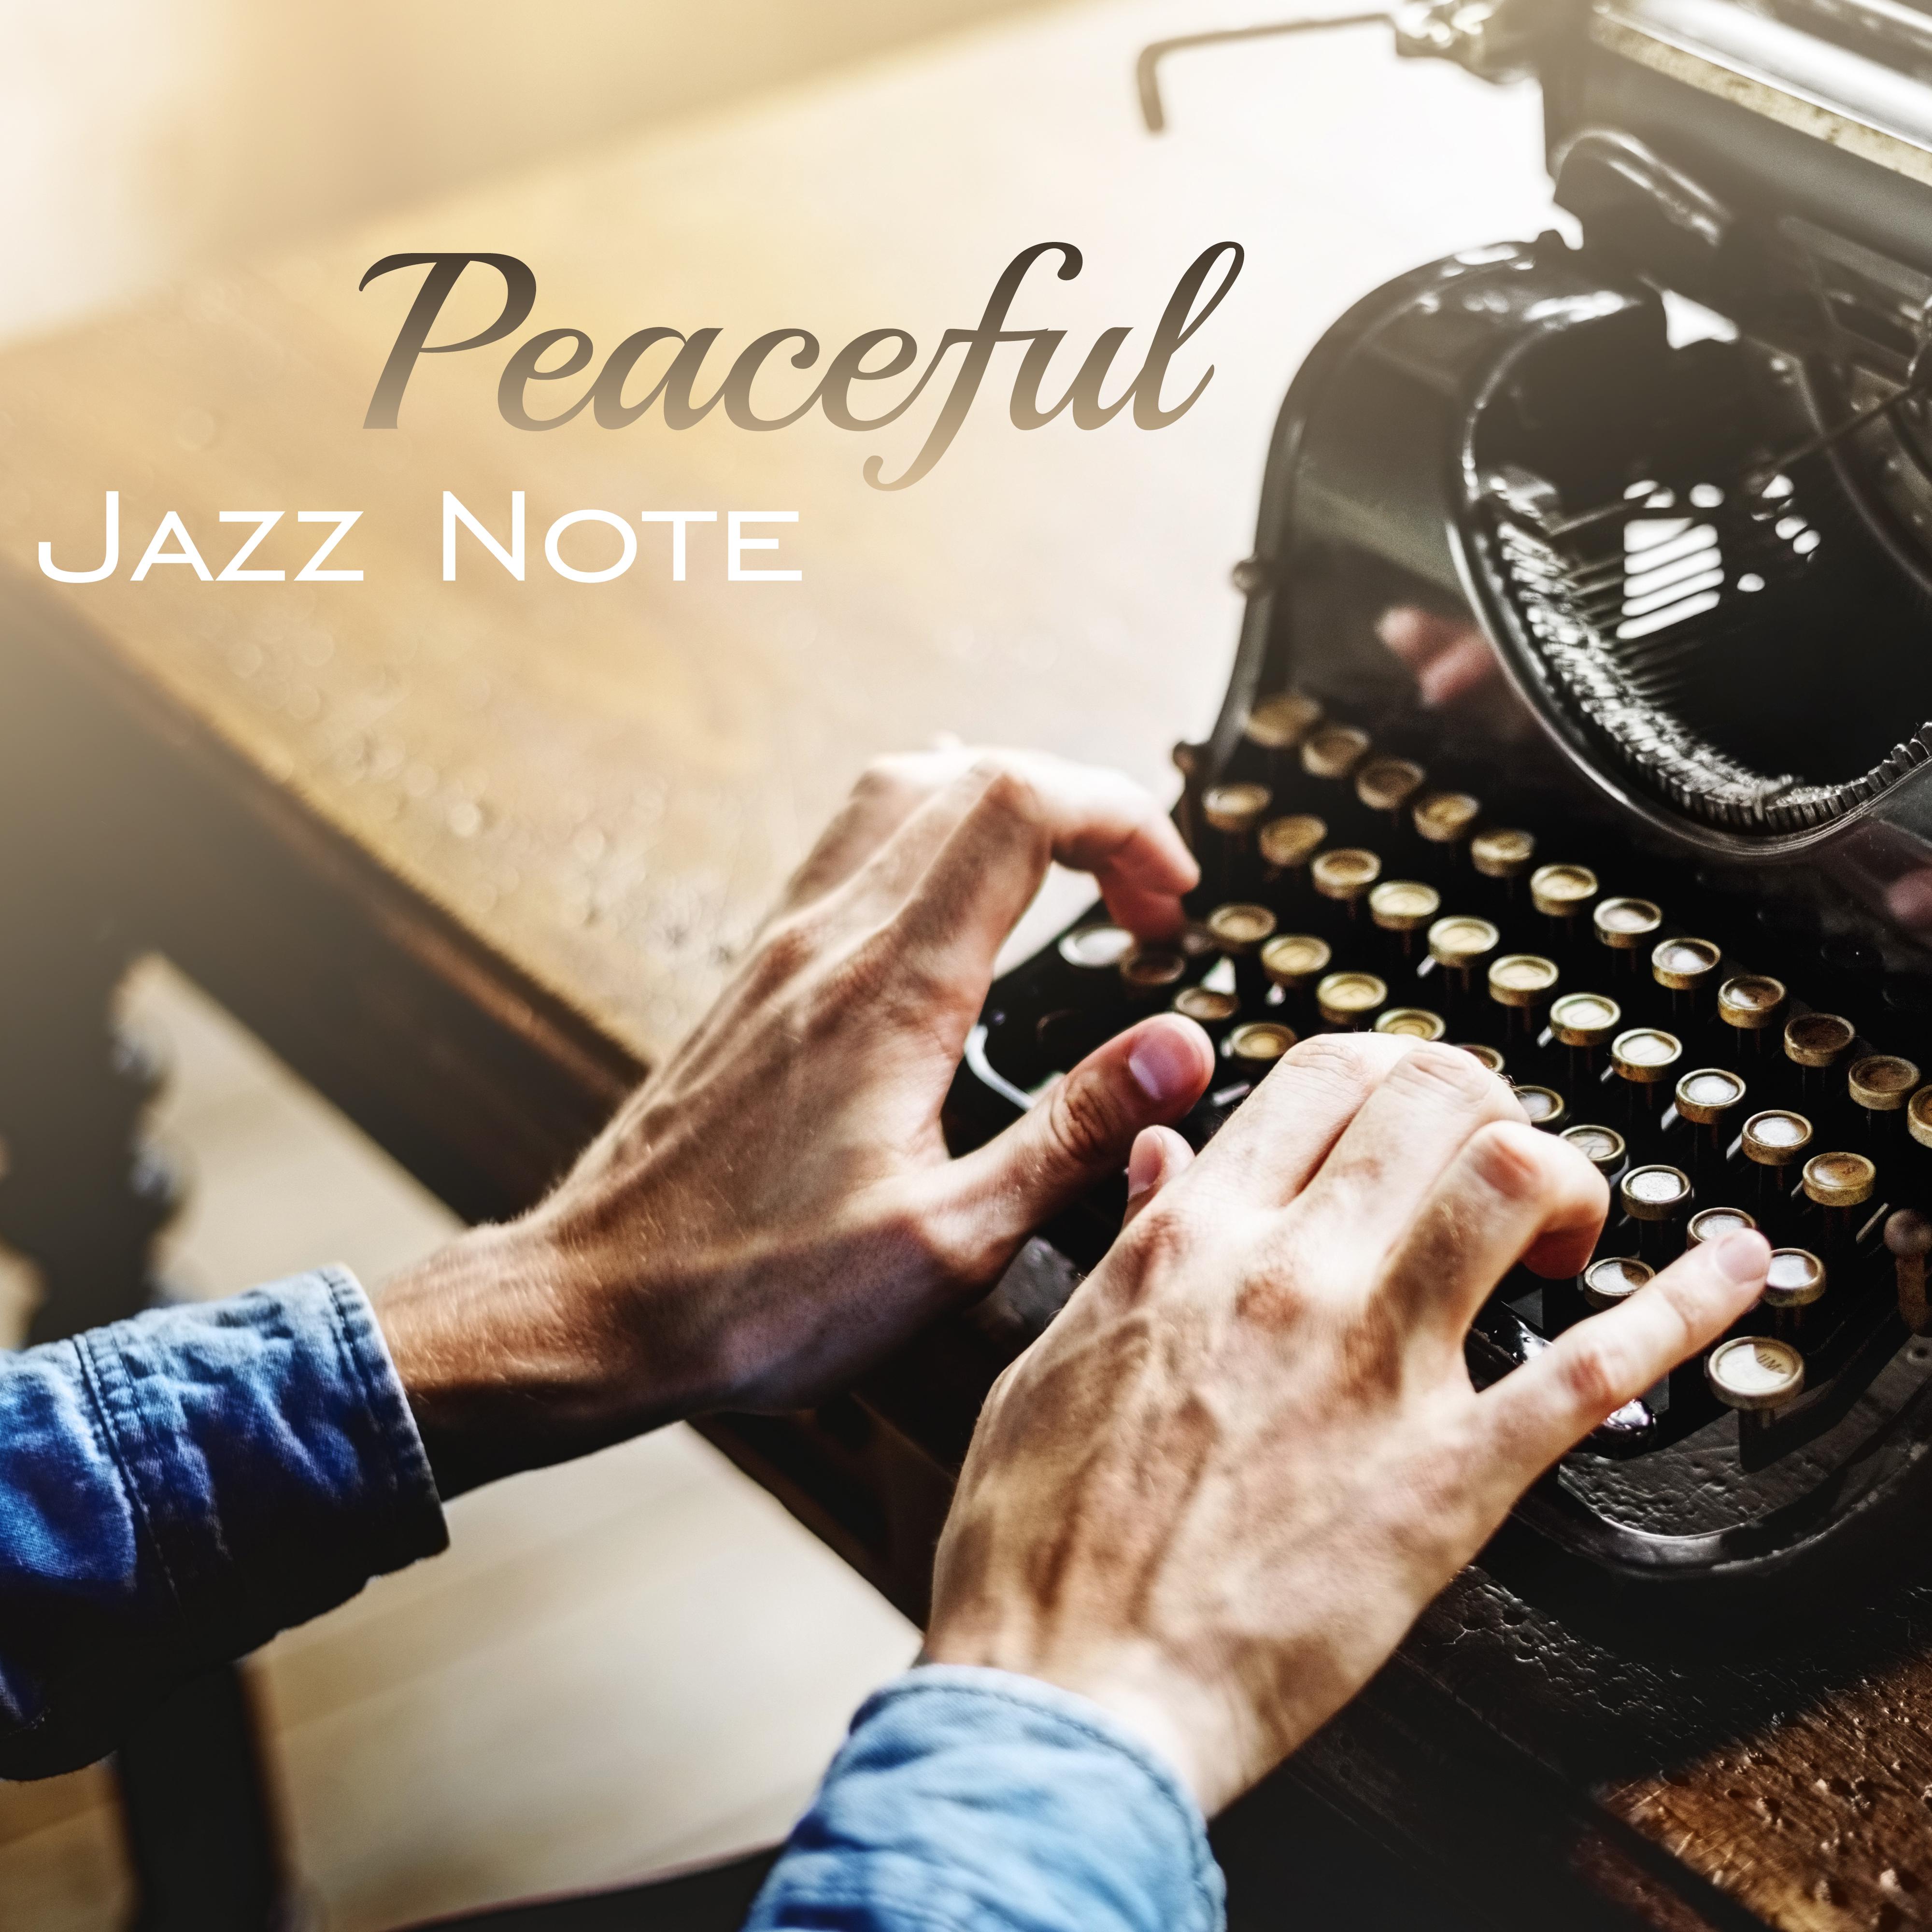 Peaceful Jazz Note – Easy Listening Jazz Music, Stress Relief, Calming Sounds, Mellow Night Jazz